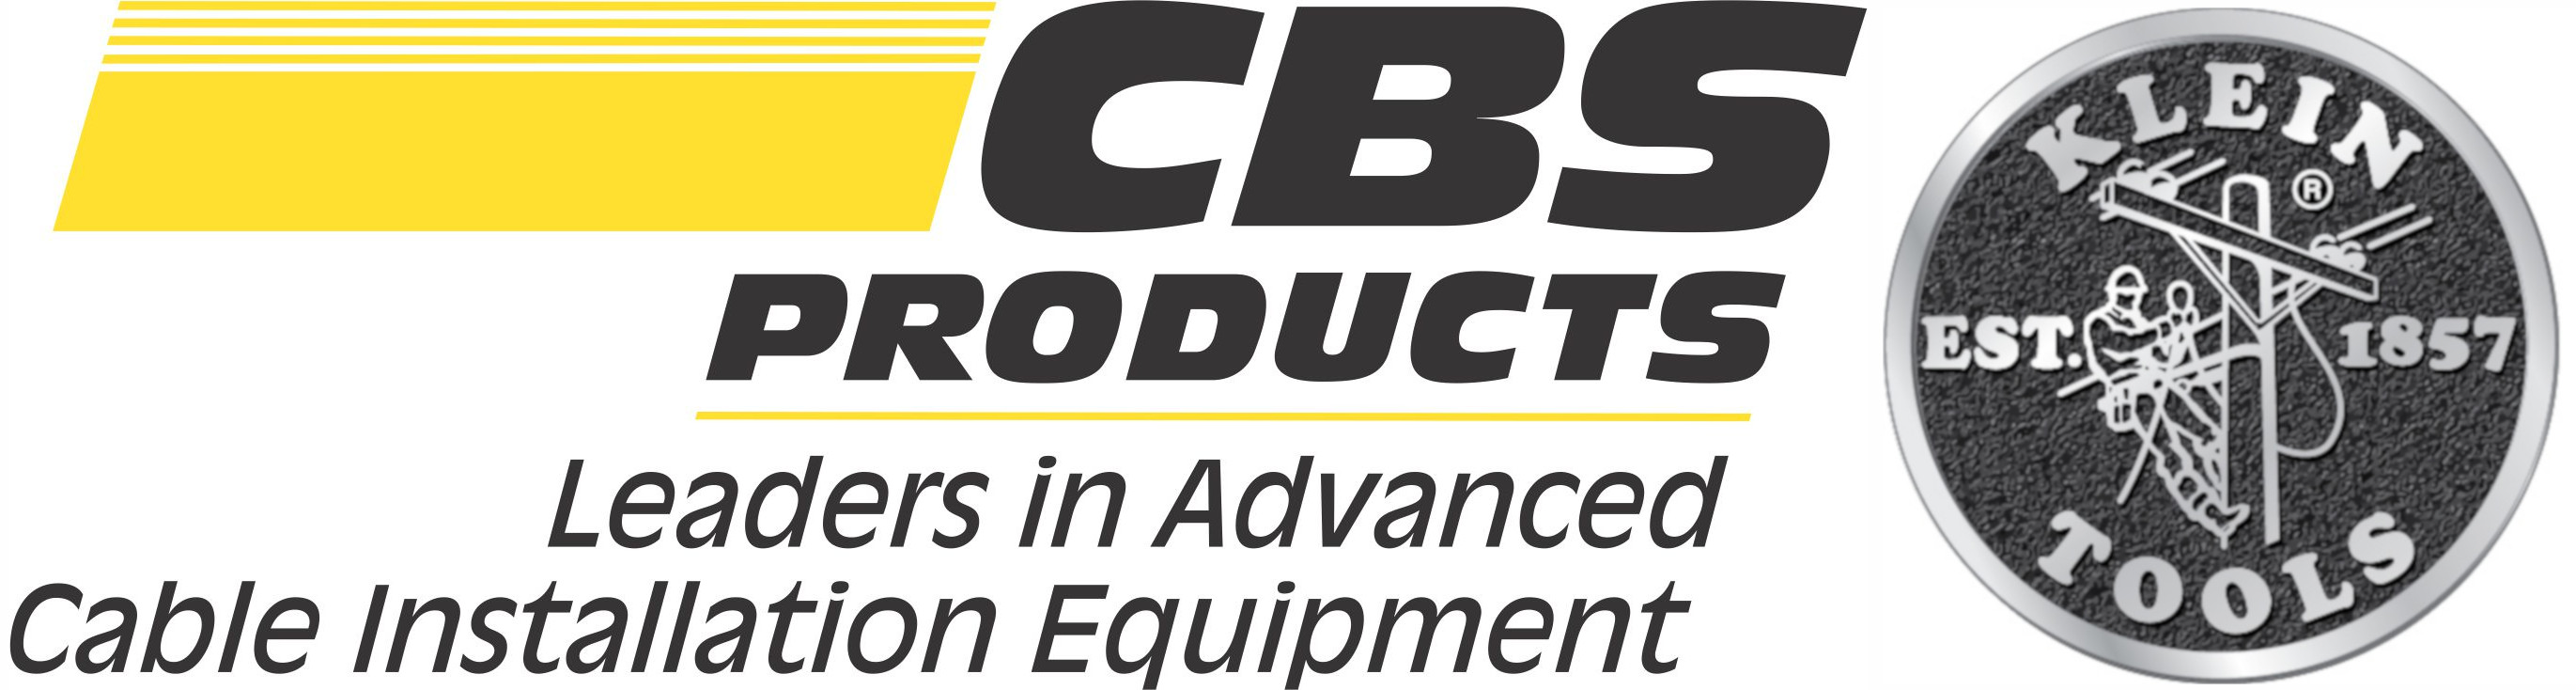 CBS Products